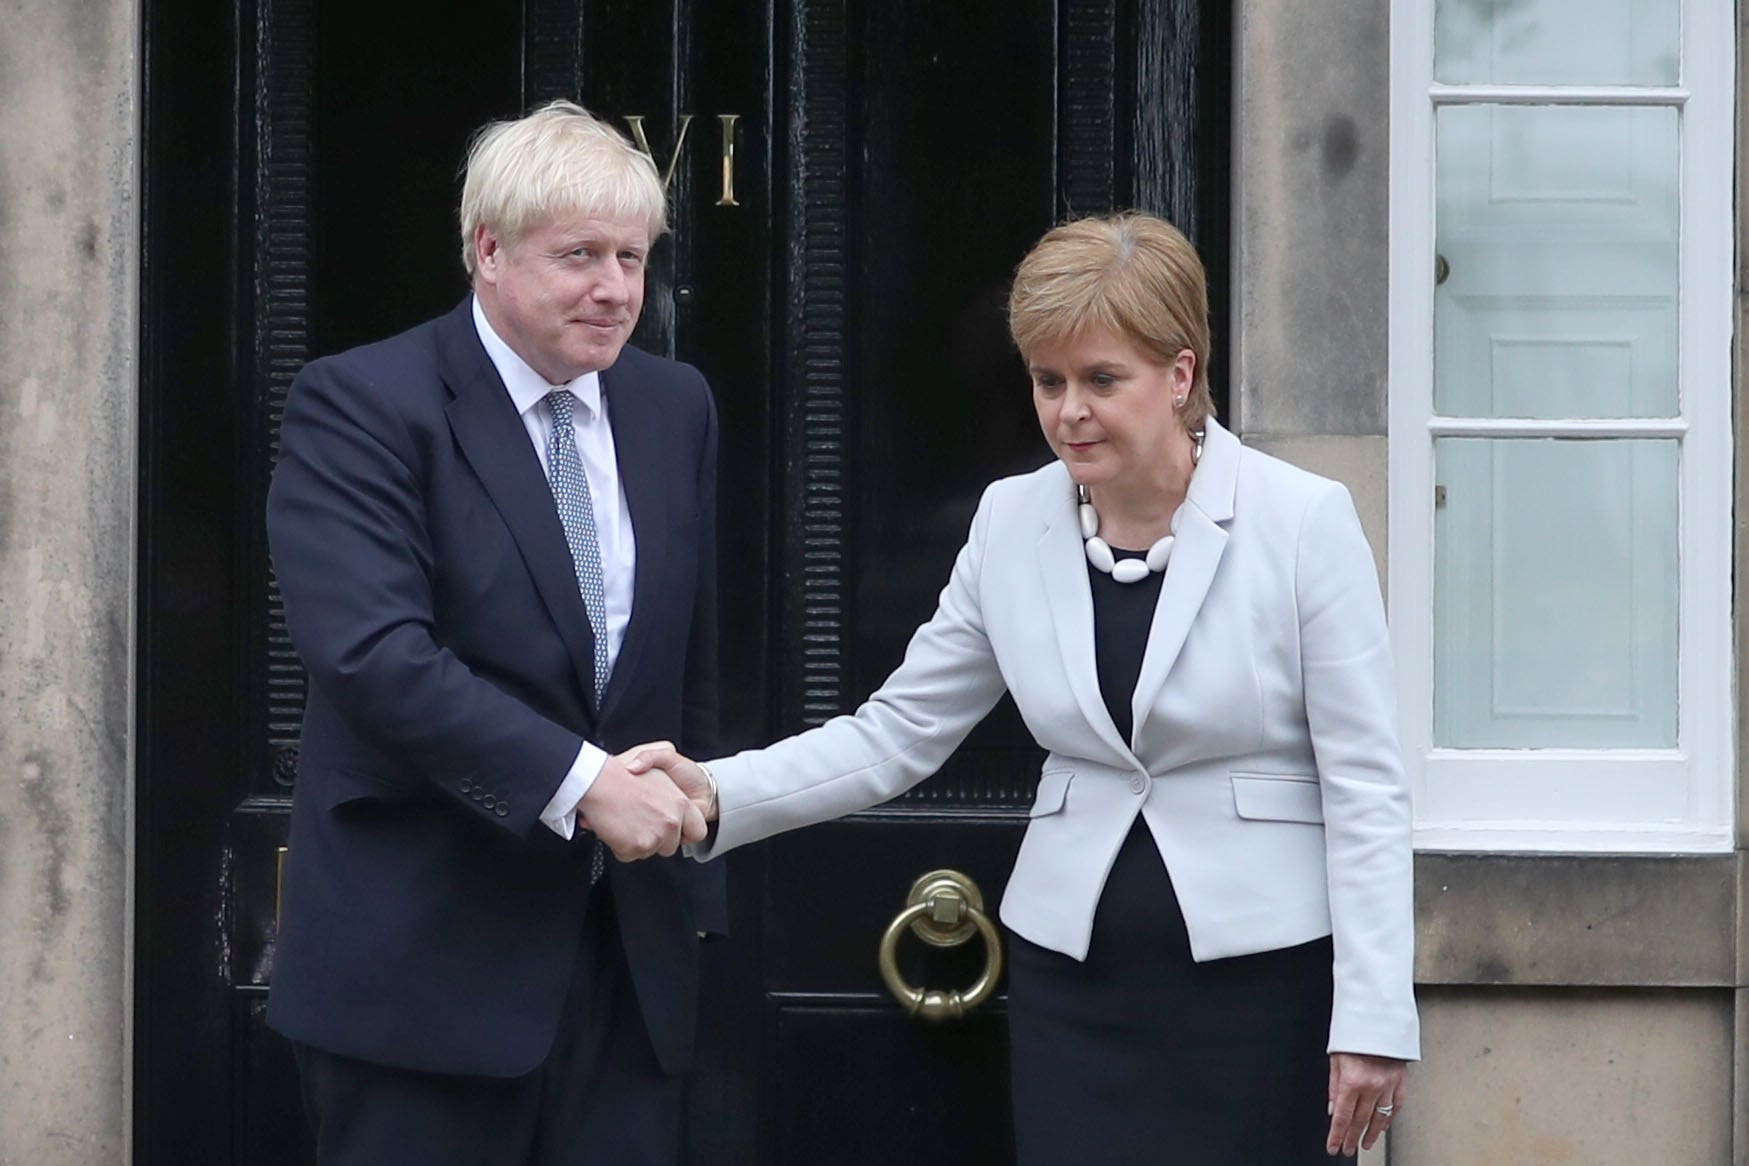 There are cogent reasons to criticise Sturgeon but we should not let our animosity run awry